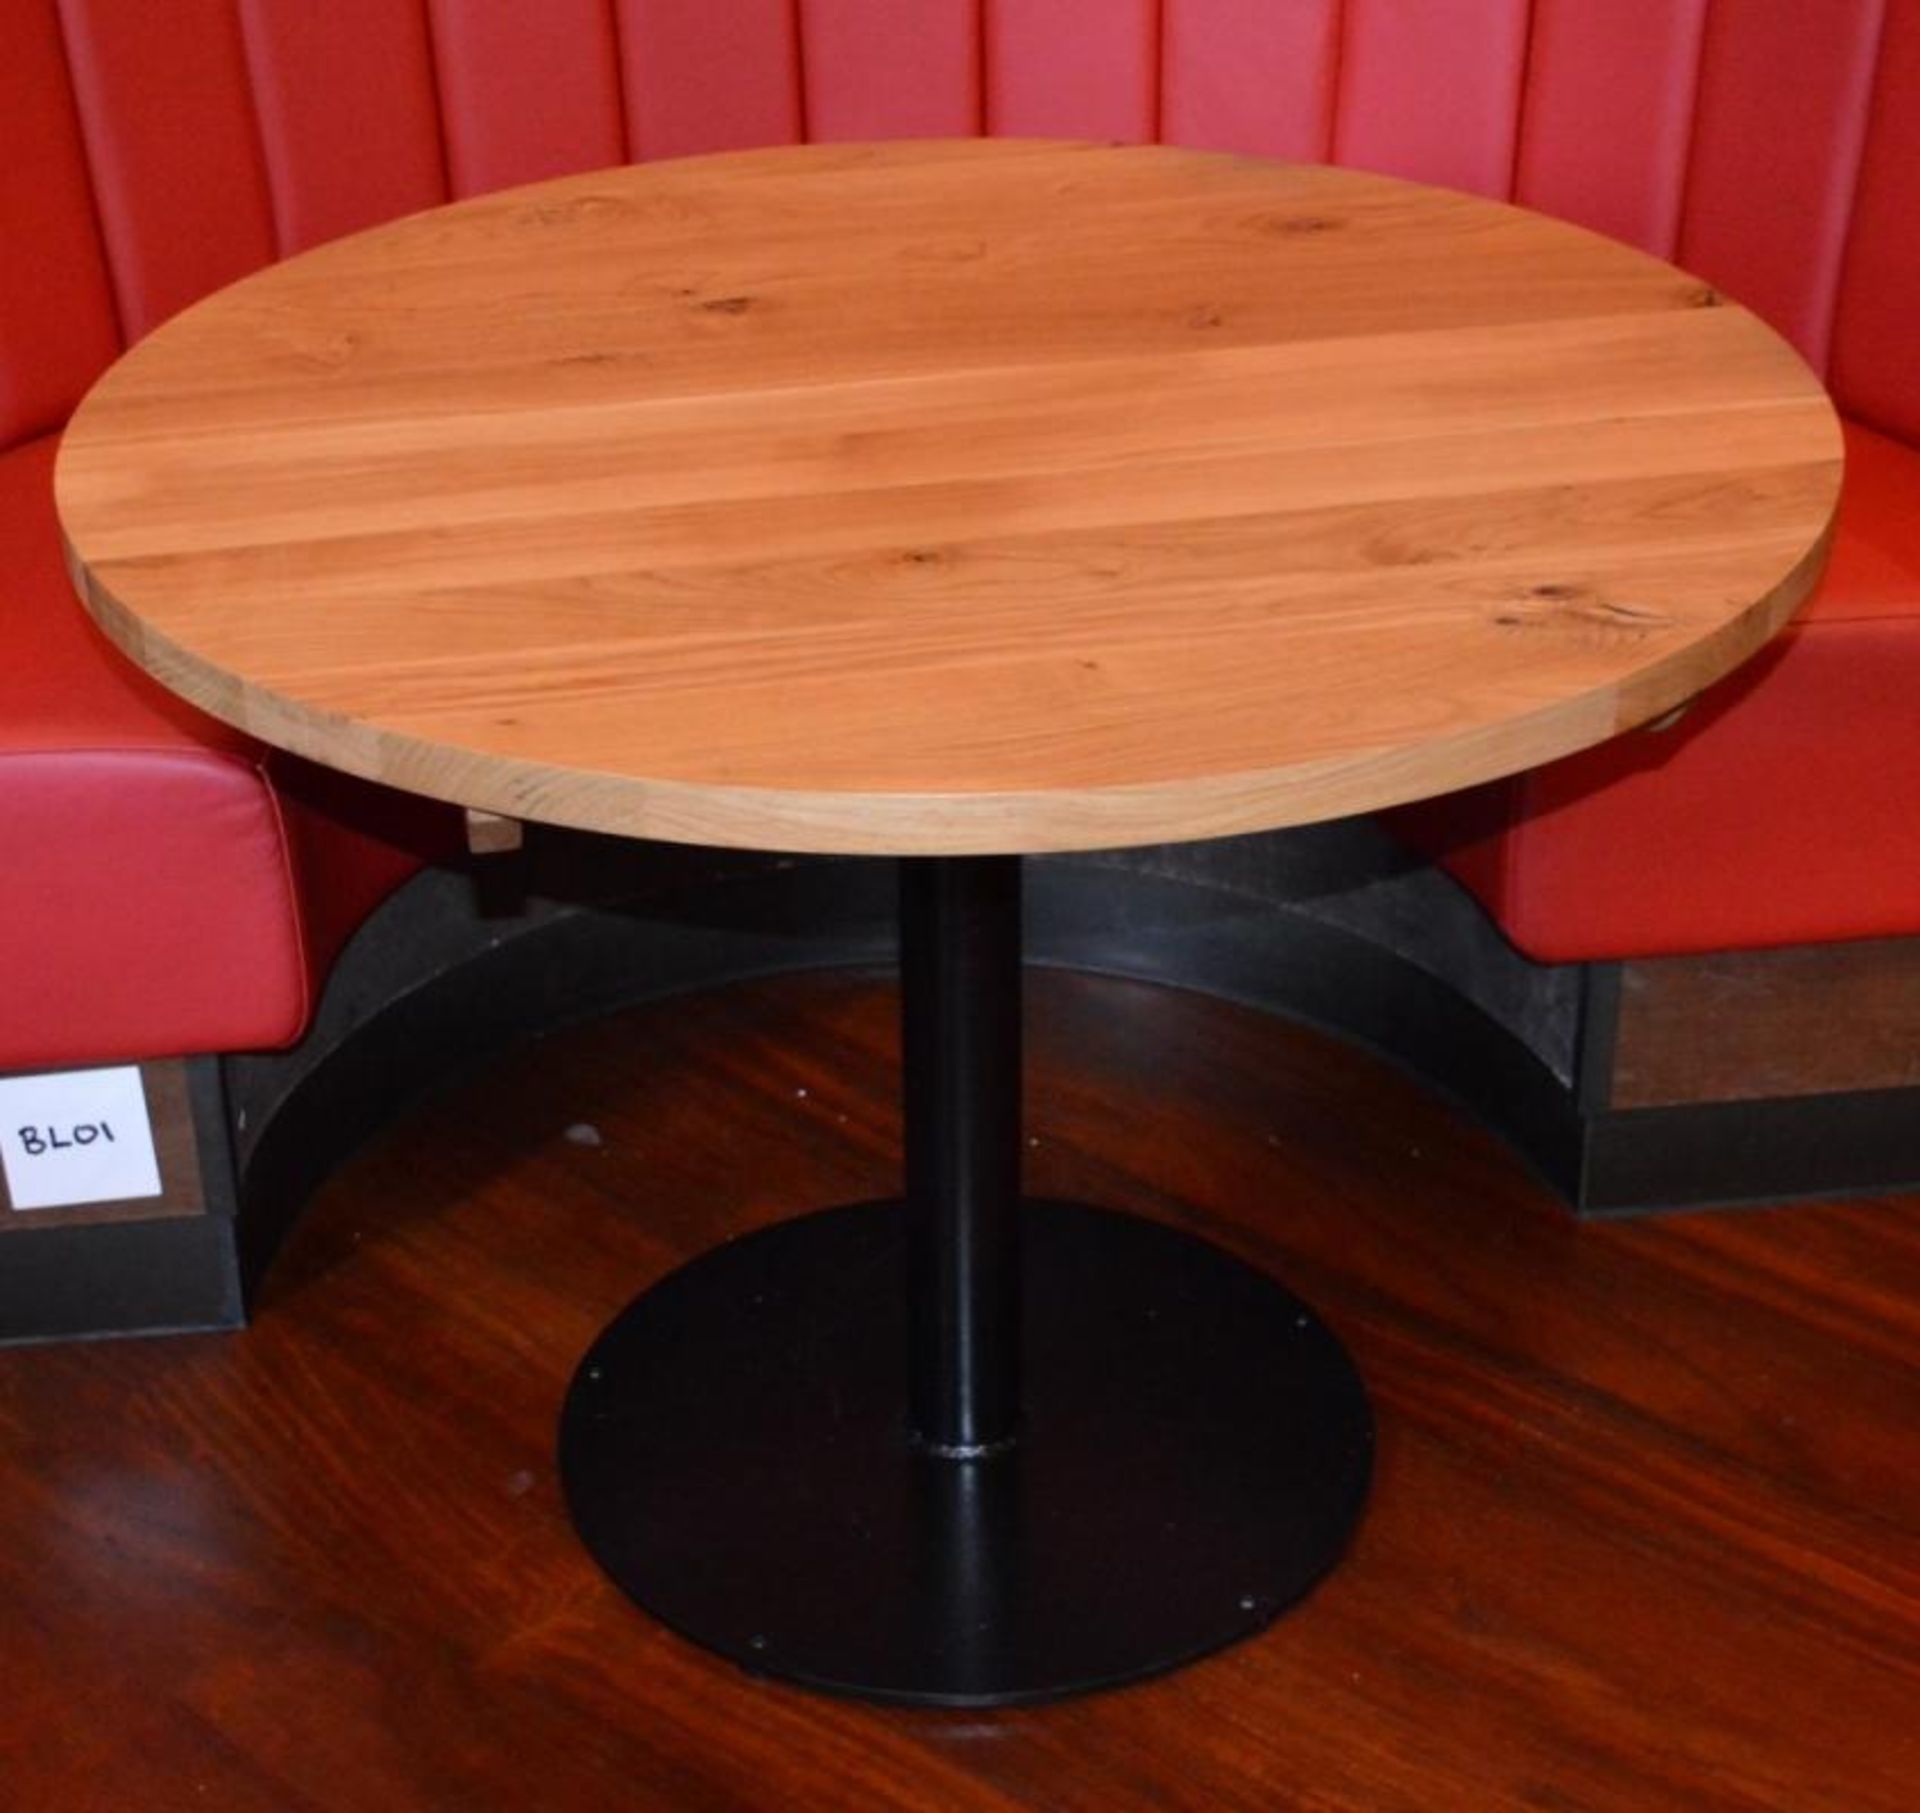 4 x Round Restaurant / Bistro Tables - Wooden Topped With A Metal Base - Diameter 90cm / Height 76cm